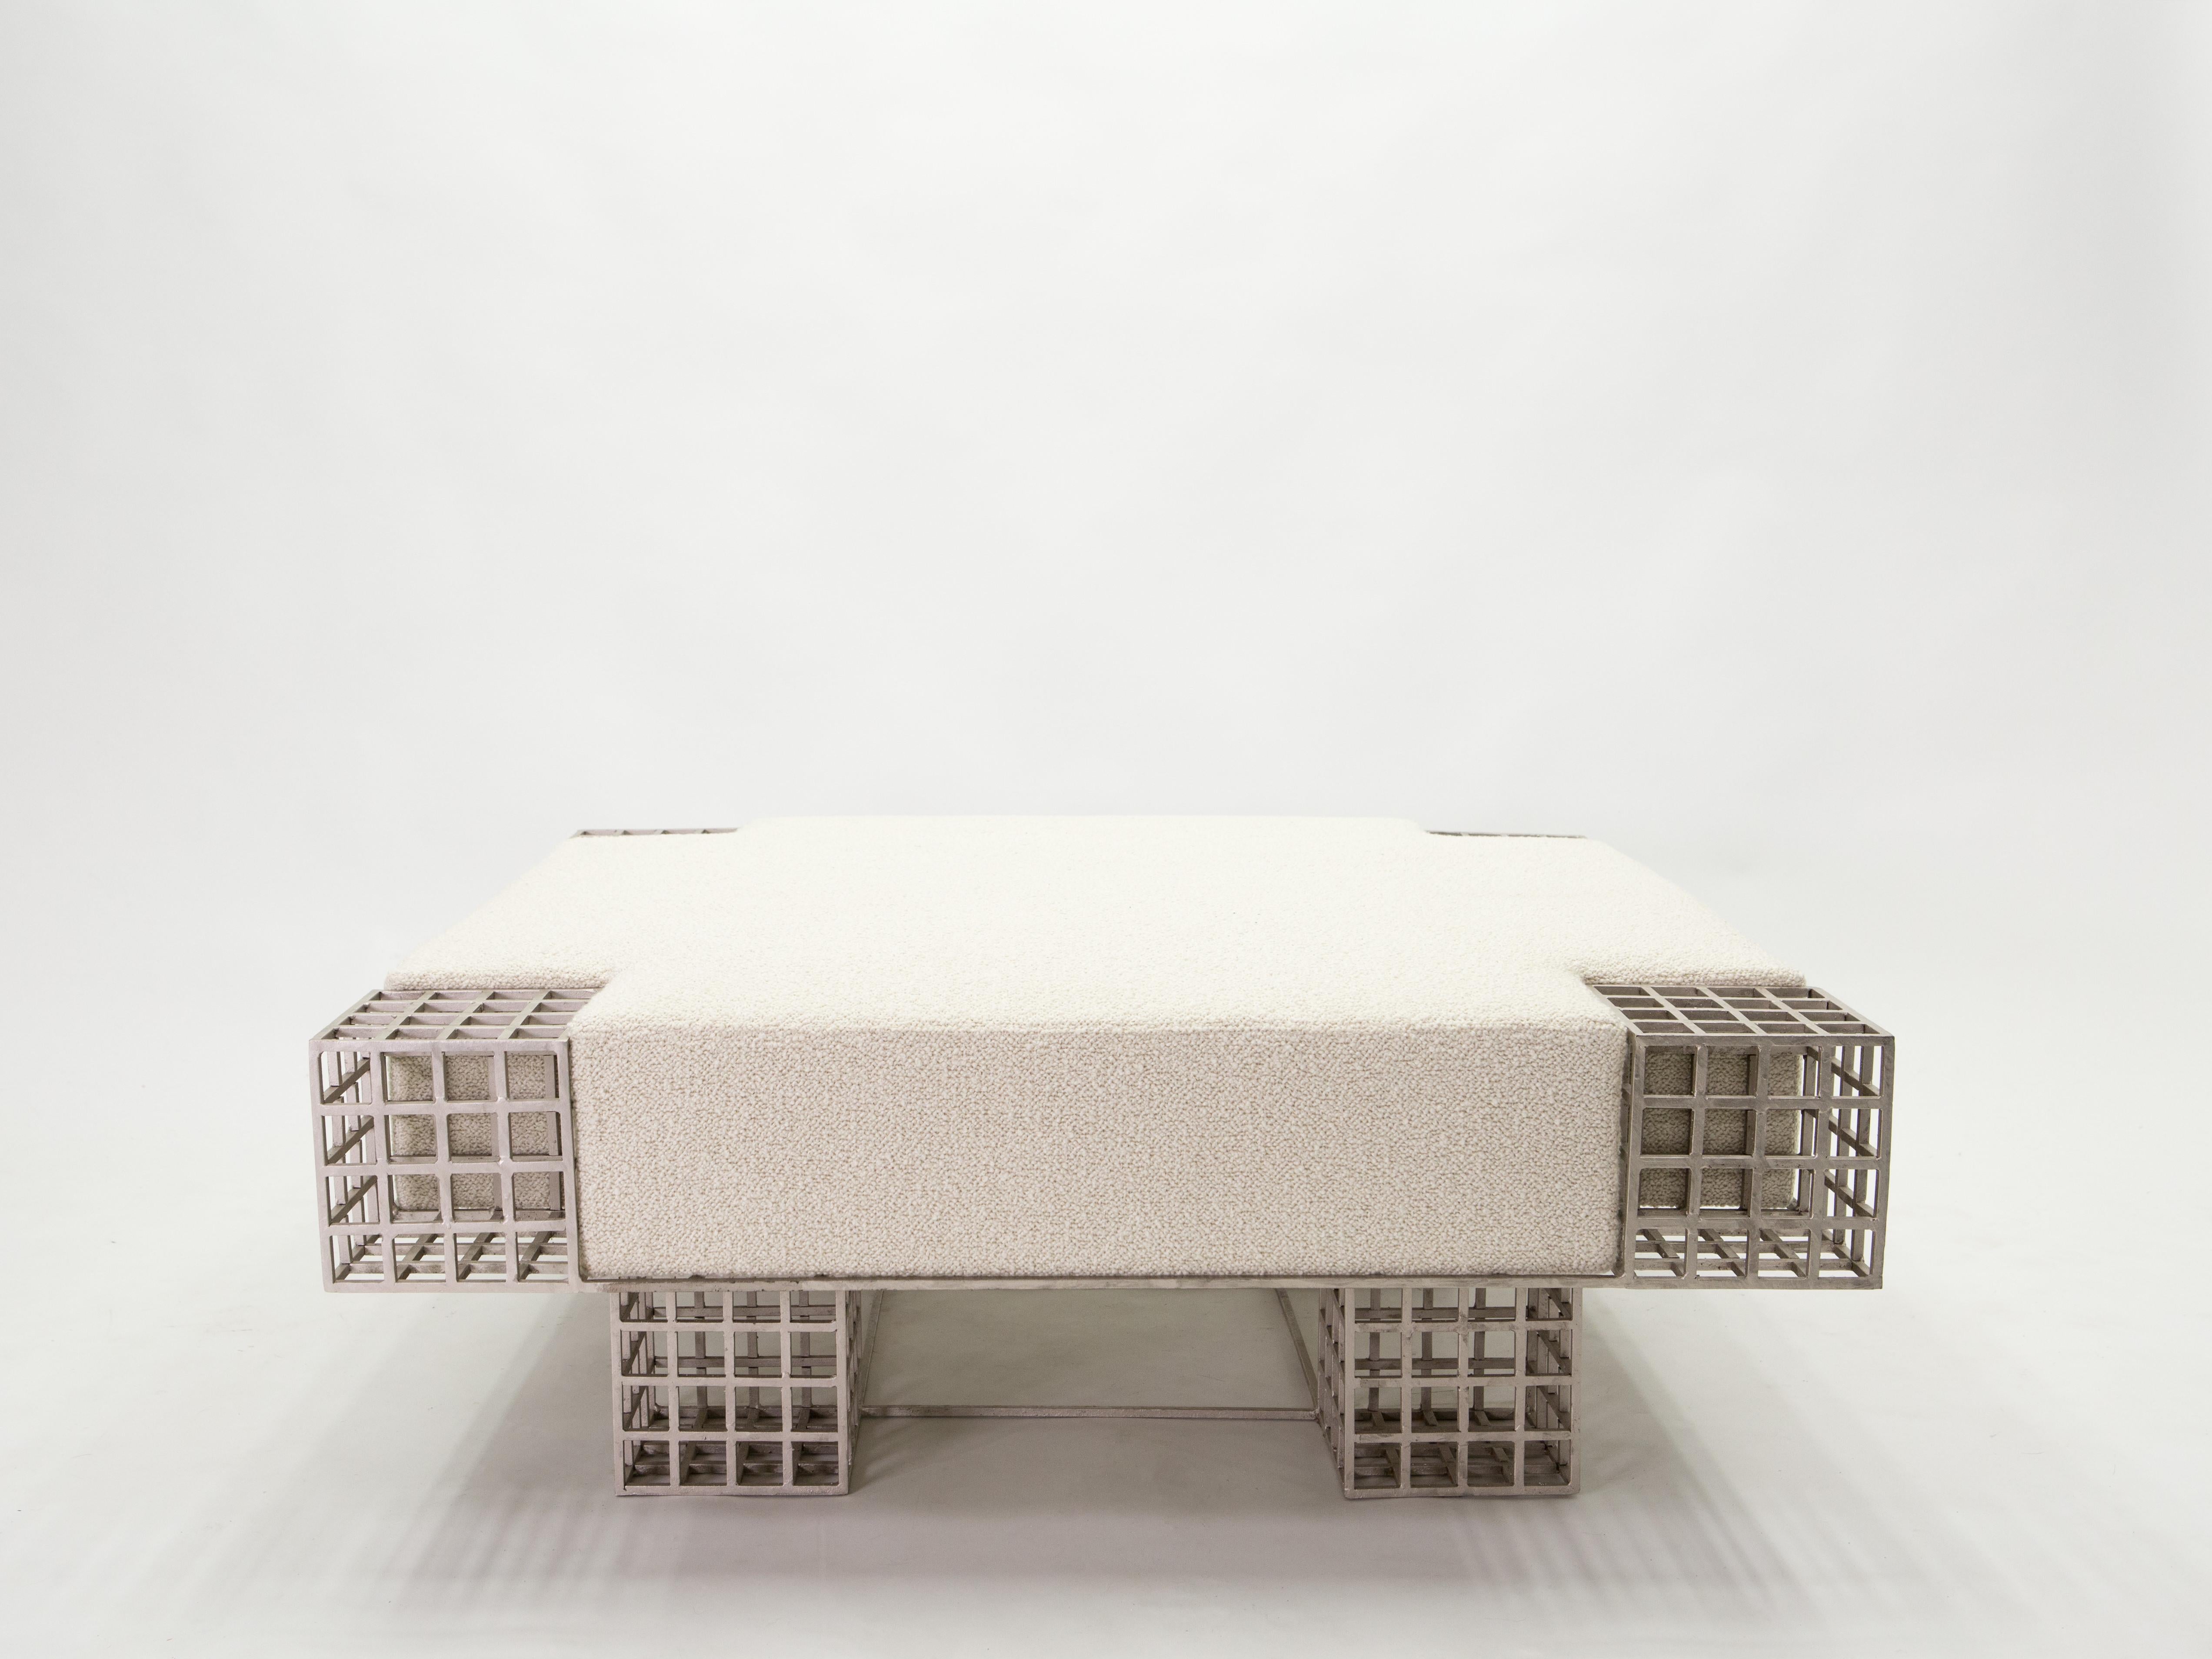 This is a very rare and unique Italian bench ottoman designed by Carla Sozzani for her gallery in Milano in the late 1990s. With strong architectural lines, the handmade steel structure is a work of art. It has been fully restored, and newly